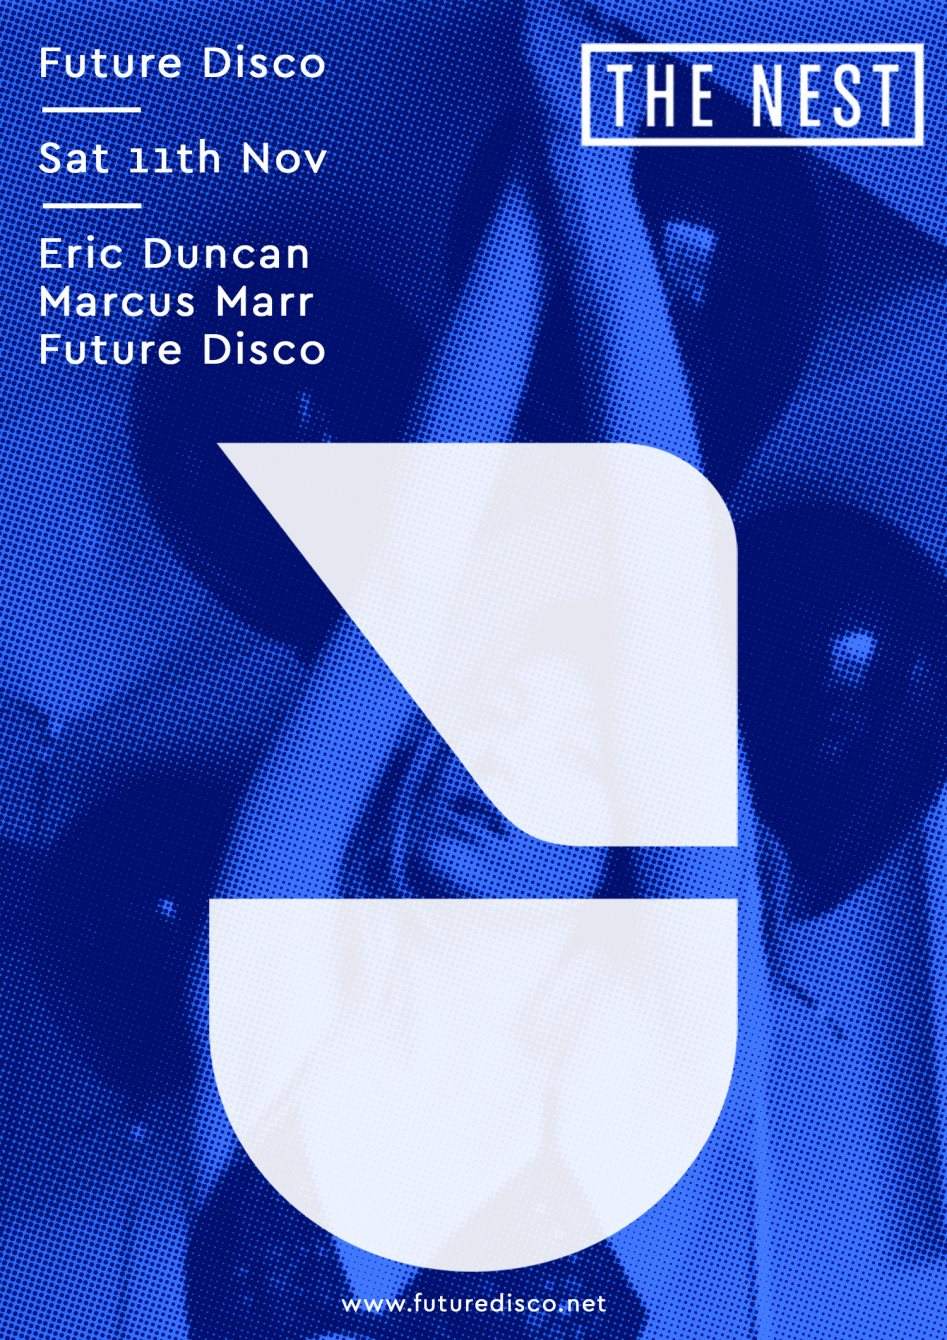 Future Disco with Eric Duncan and Marcus Marr - フライヤー表